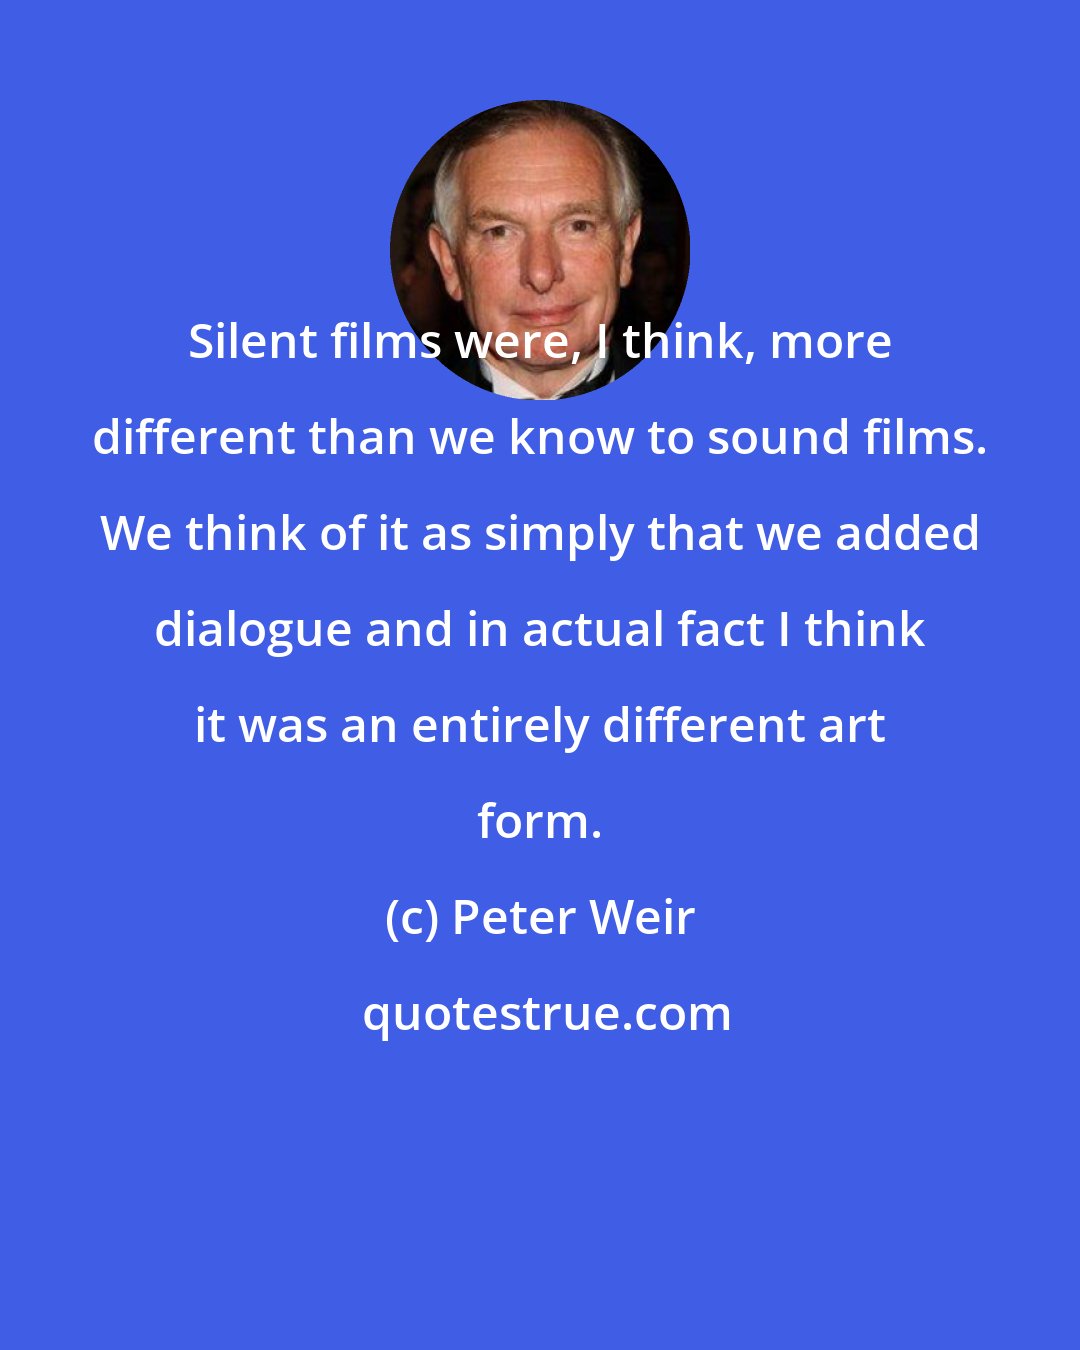 Peter Weir: Silent films were, I think, more different than we know to sound films. We think of it as simply that we added dialogue and in actual fact I think it was an entirely different art form.